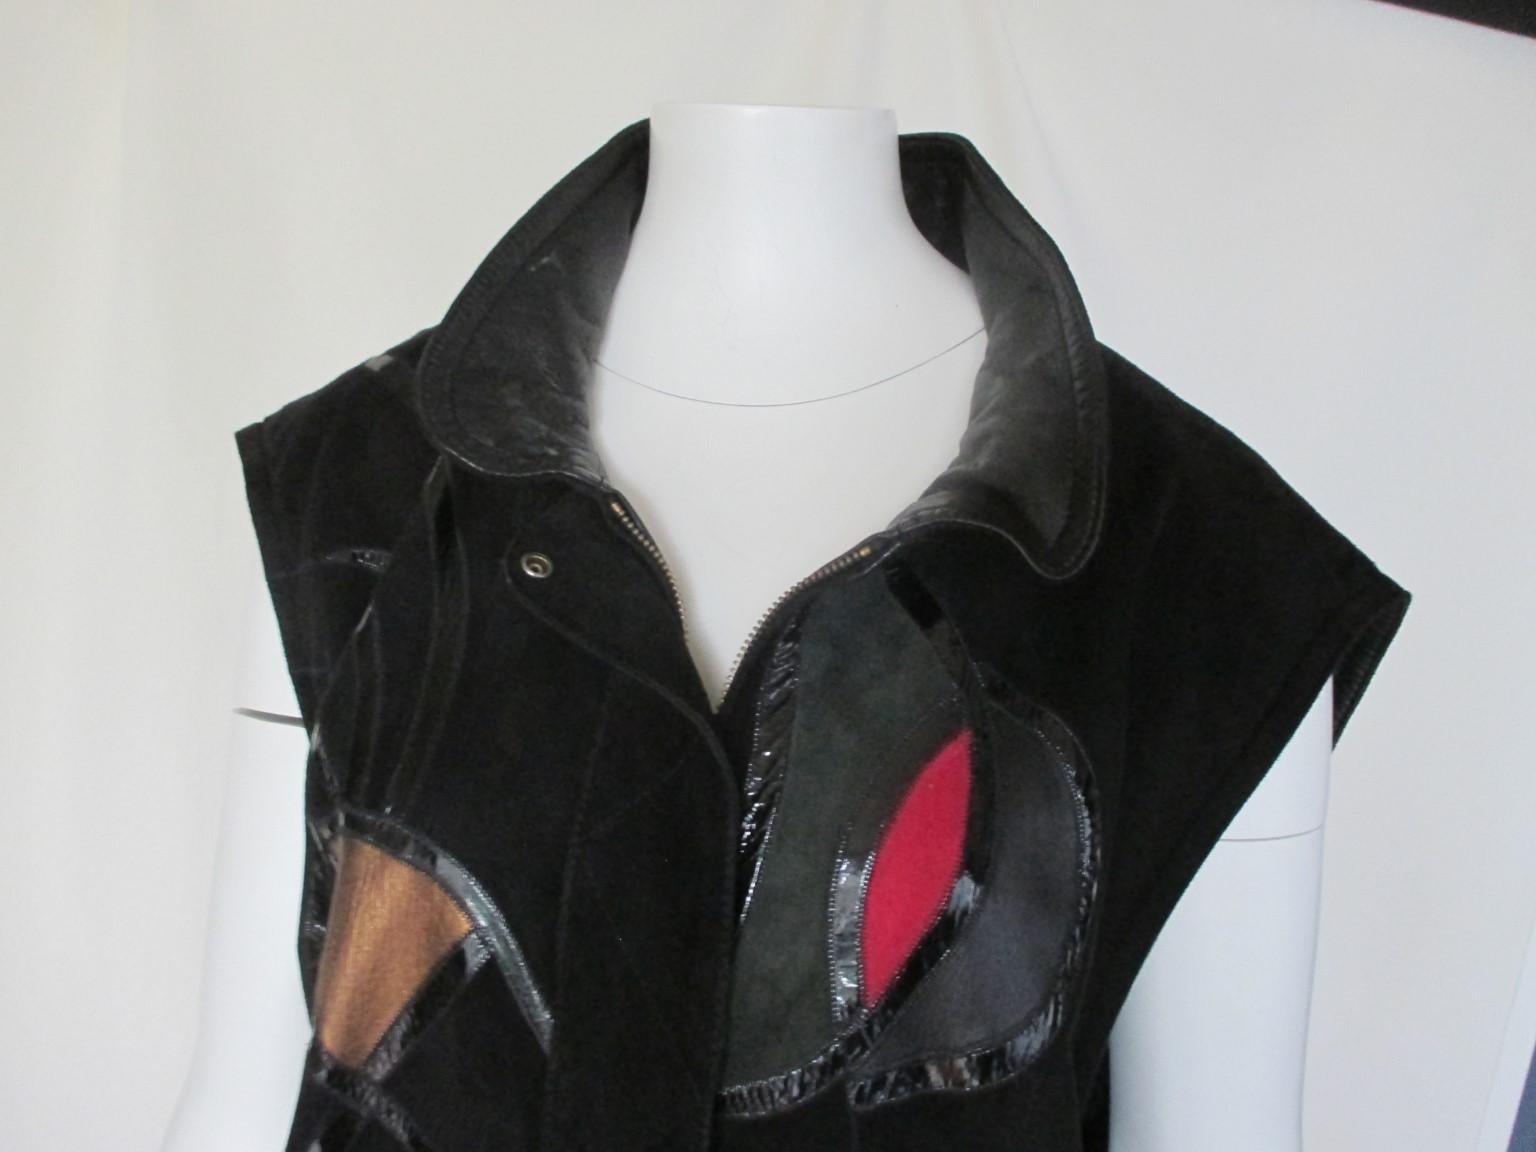 Vintage 1980 unique sleeveless suede art leather vest.

We offer more luxury fur and leather items, view our frontstore.

Details:
This coat is made of a very soft calfskin suede leather and finished in beautiful colored leather patchwork art